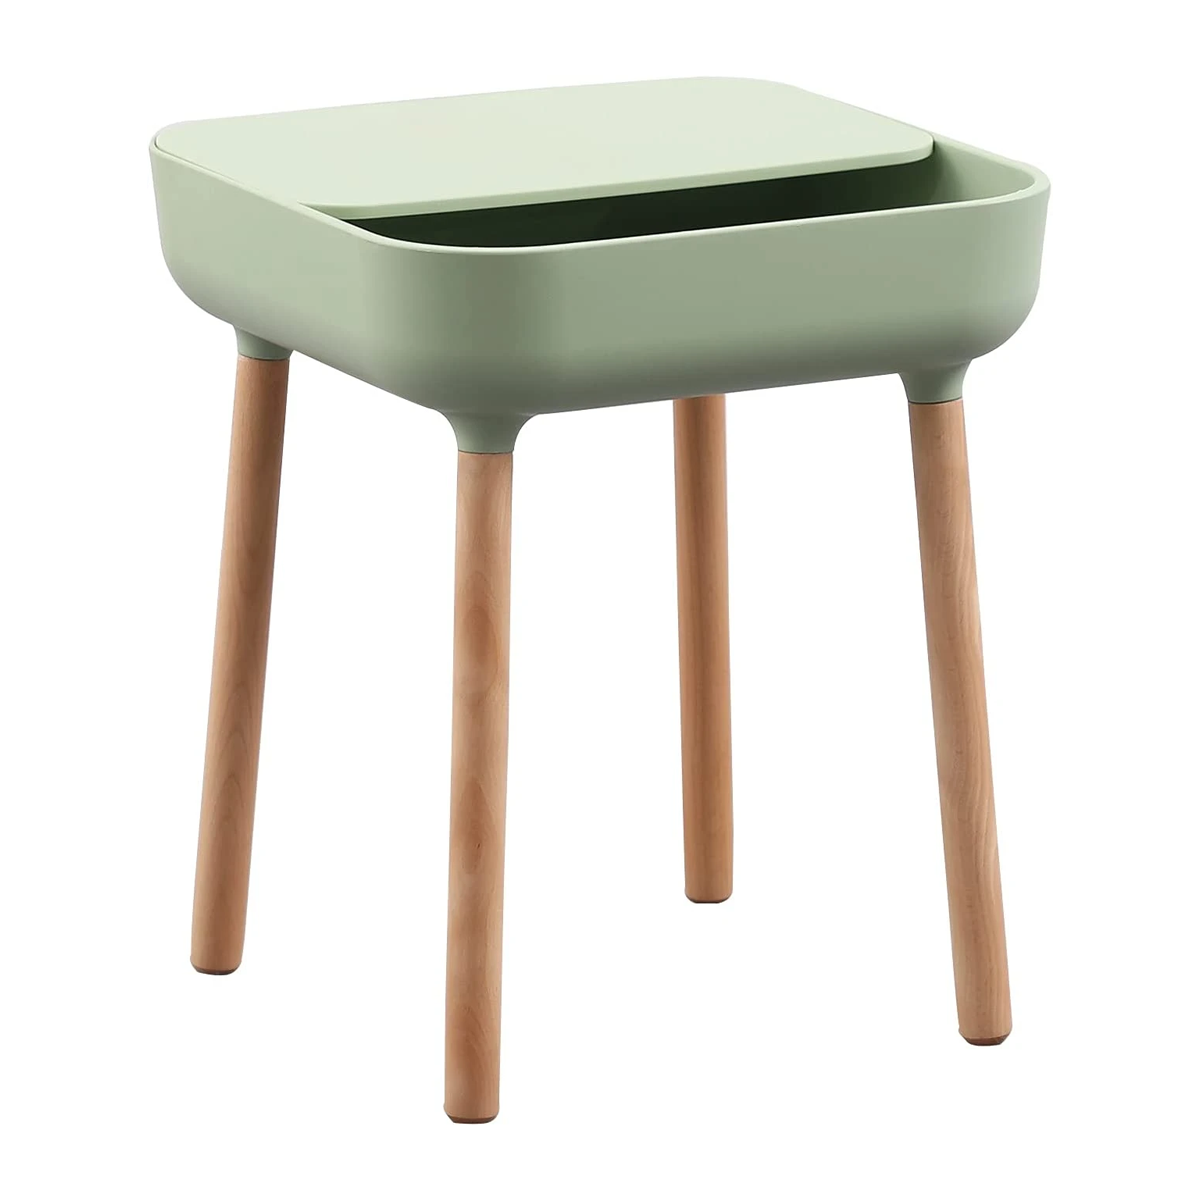 Nordic Style bedside table by DAAMUDI'S - Sage Green